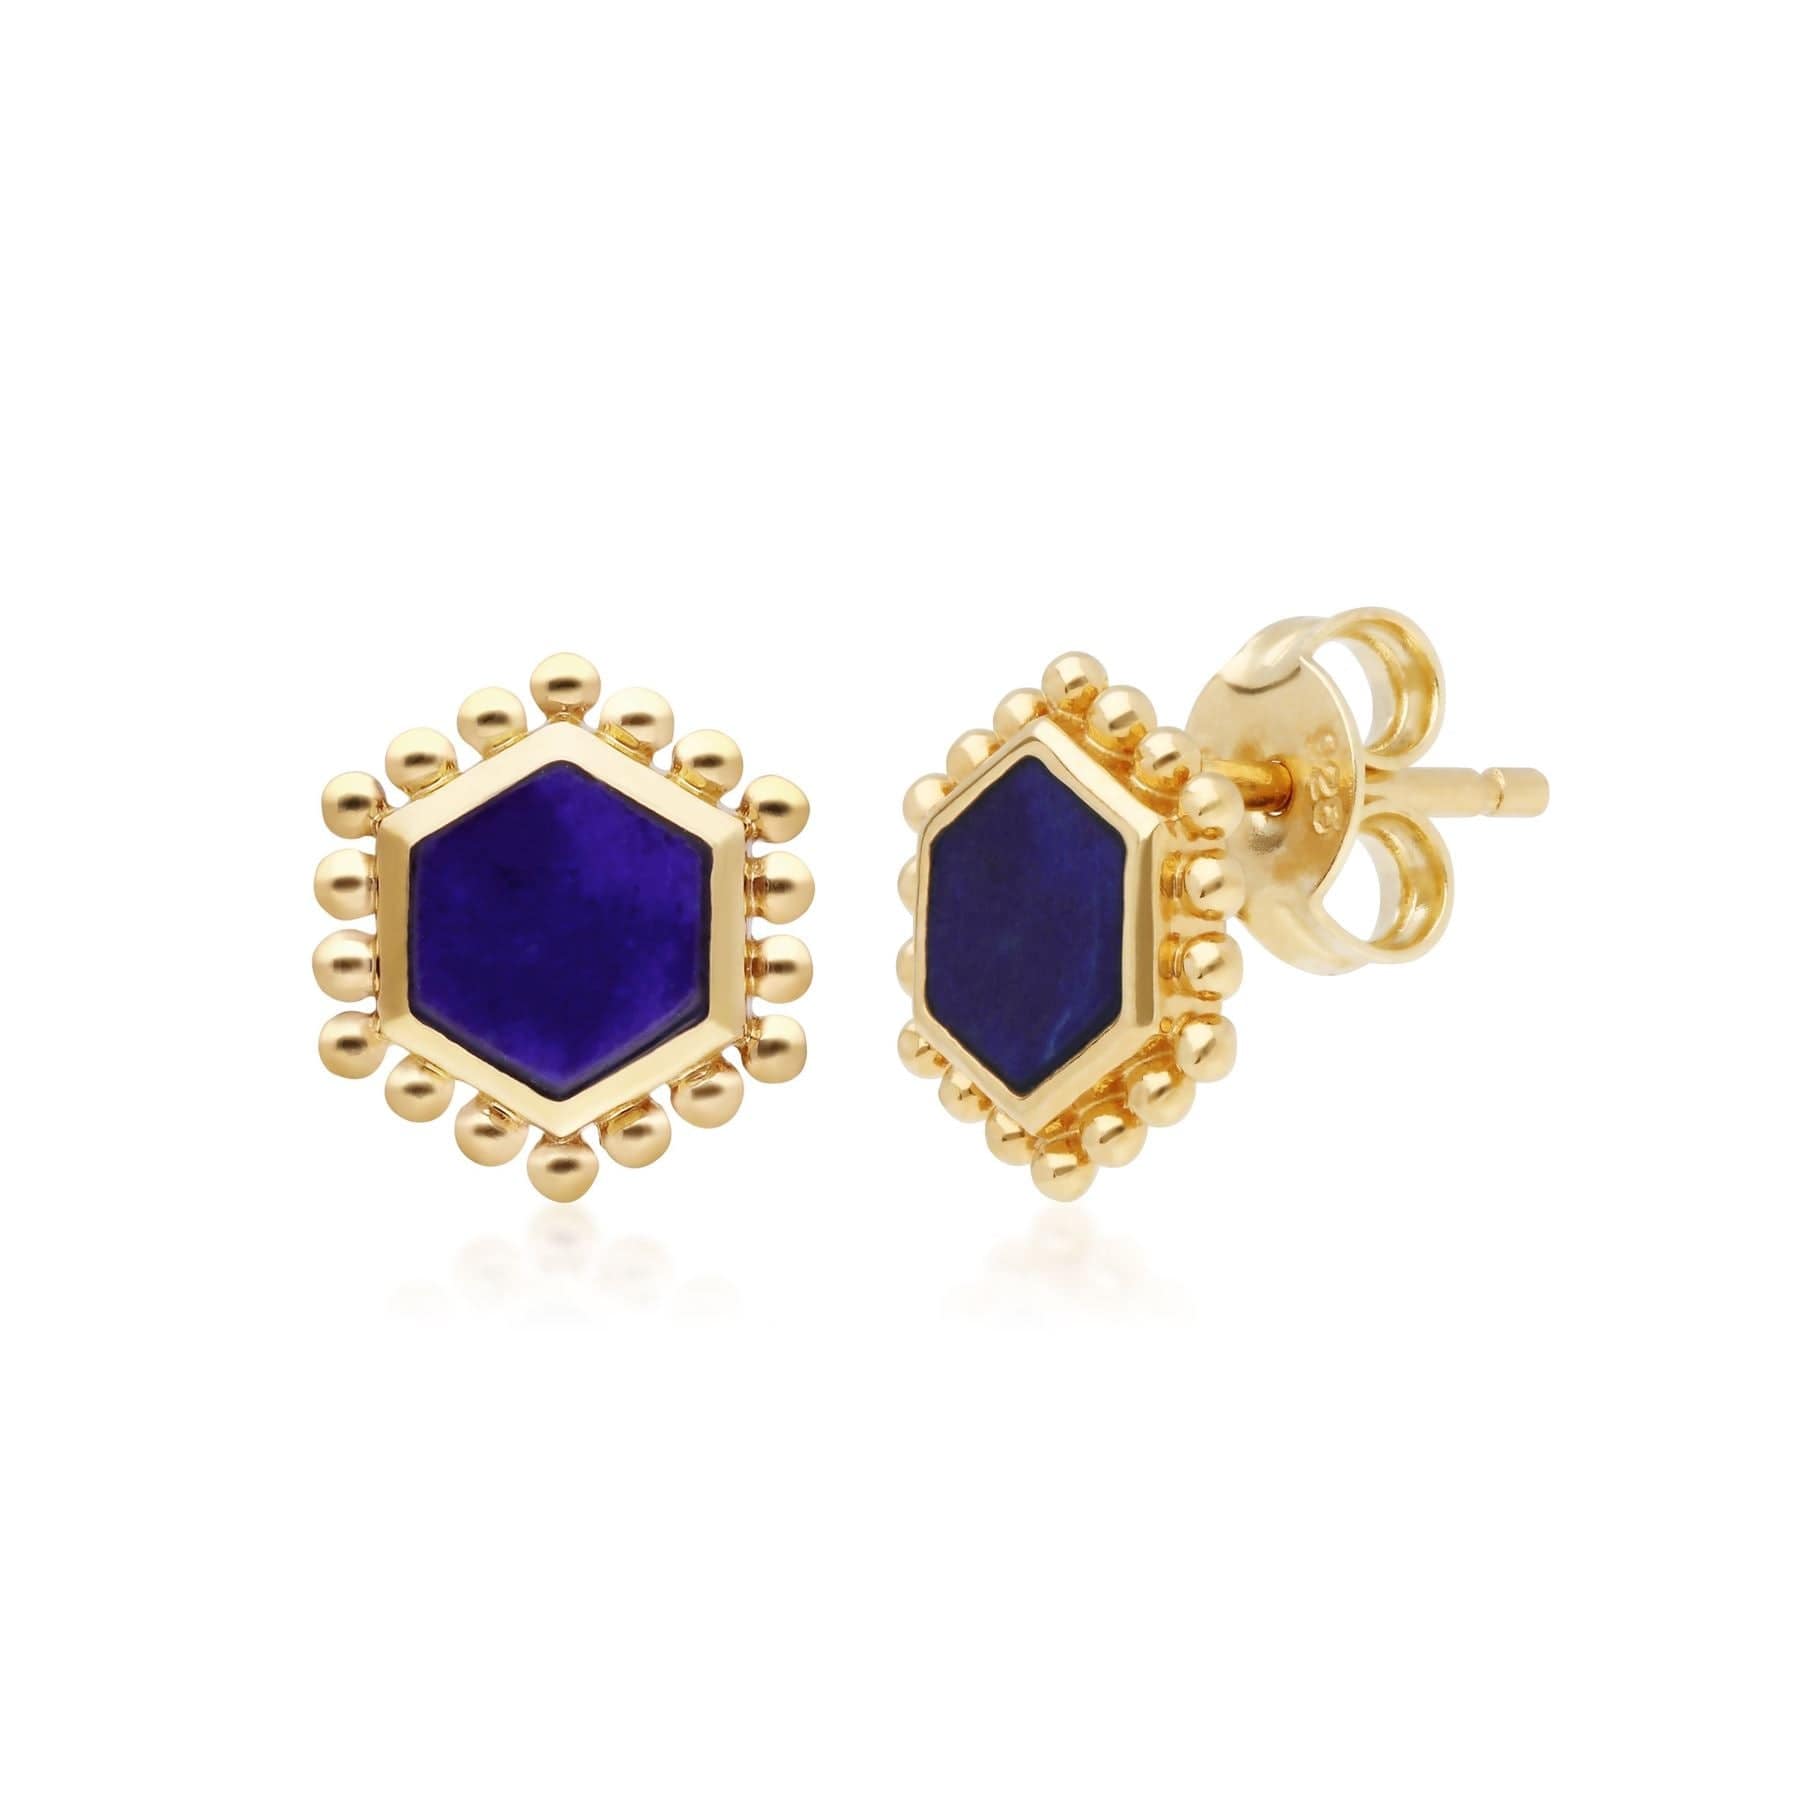 Photos - Earrings Lapis Lazuli Slice Stud  in Yellow Gold Plated Sterling Silver